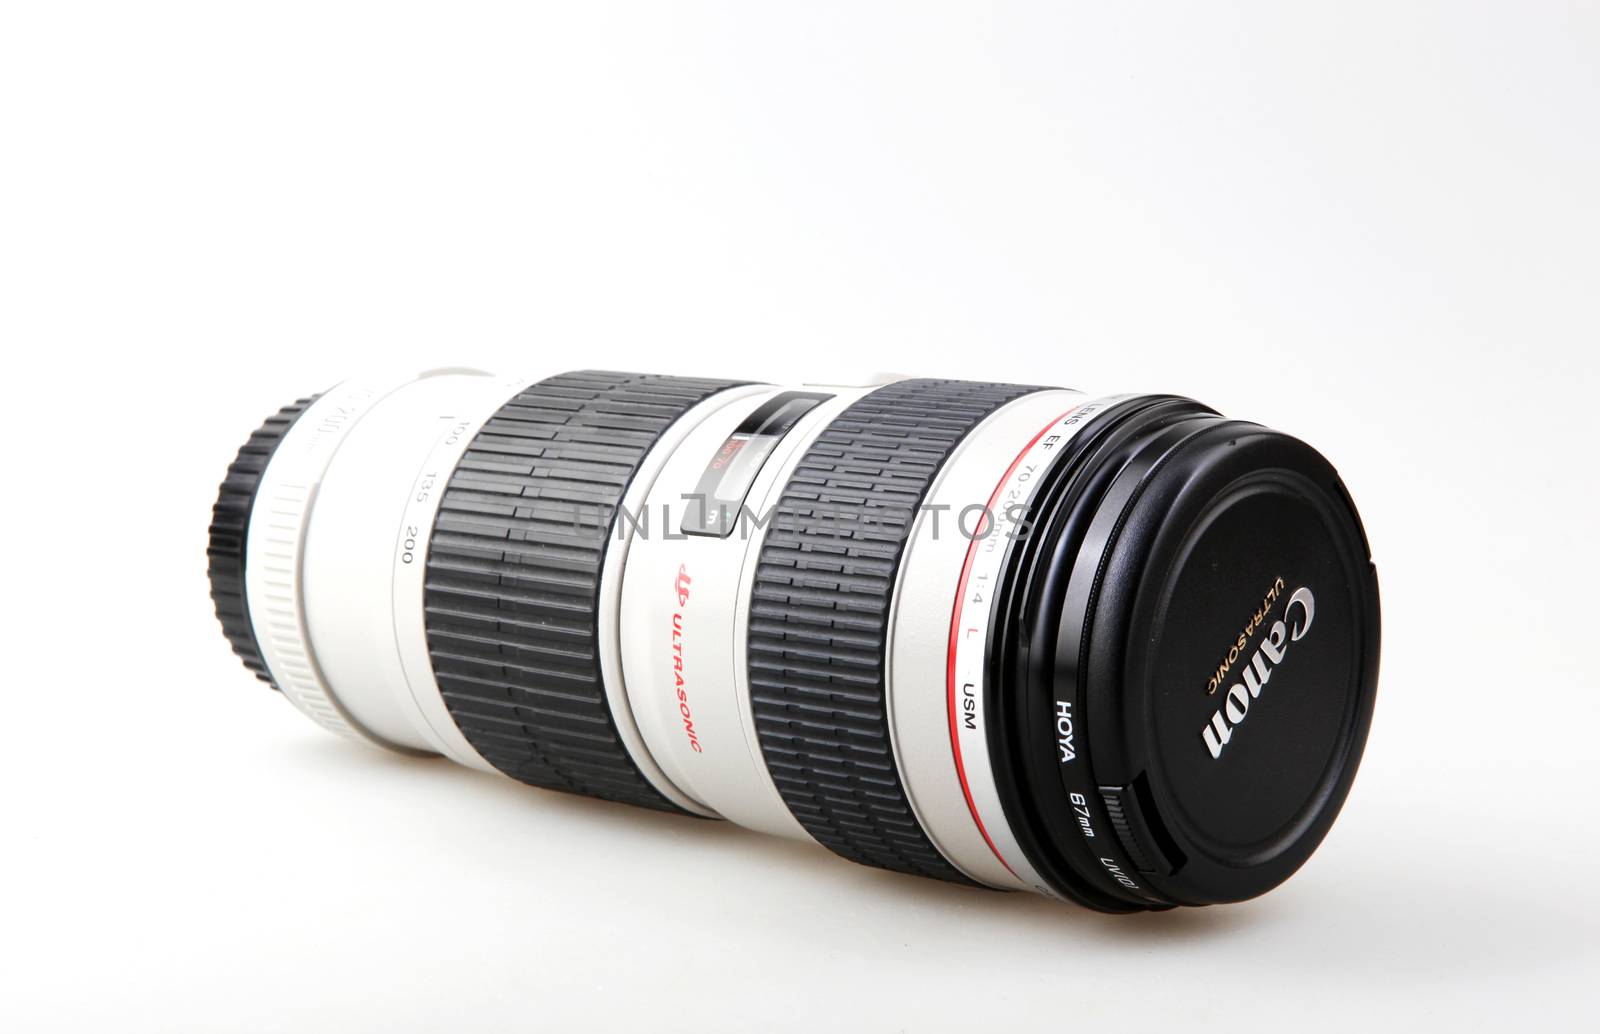 Pomorie, Bulgaria - March 01, 2019: Canon EF 70-200mm f/4L USM Lens. Canon Inc. Is A Japanese Multinational Corporation Specialized In The Manufacture Of Imaging And Optical Products.  by nenovbrothers